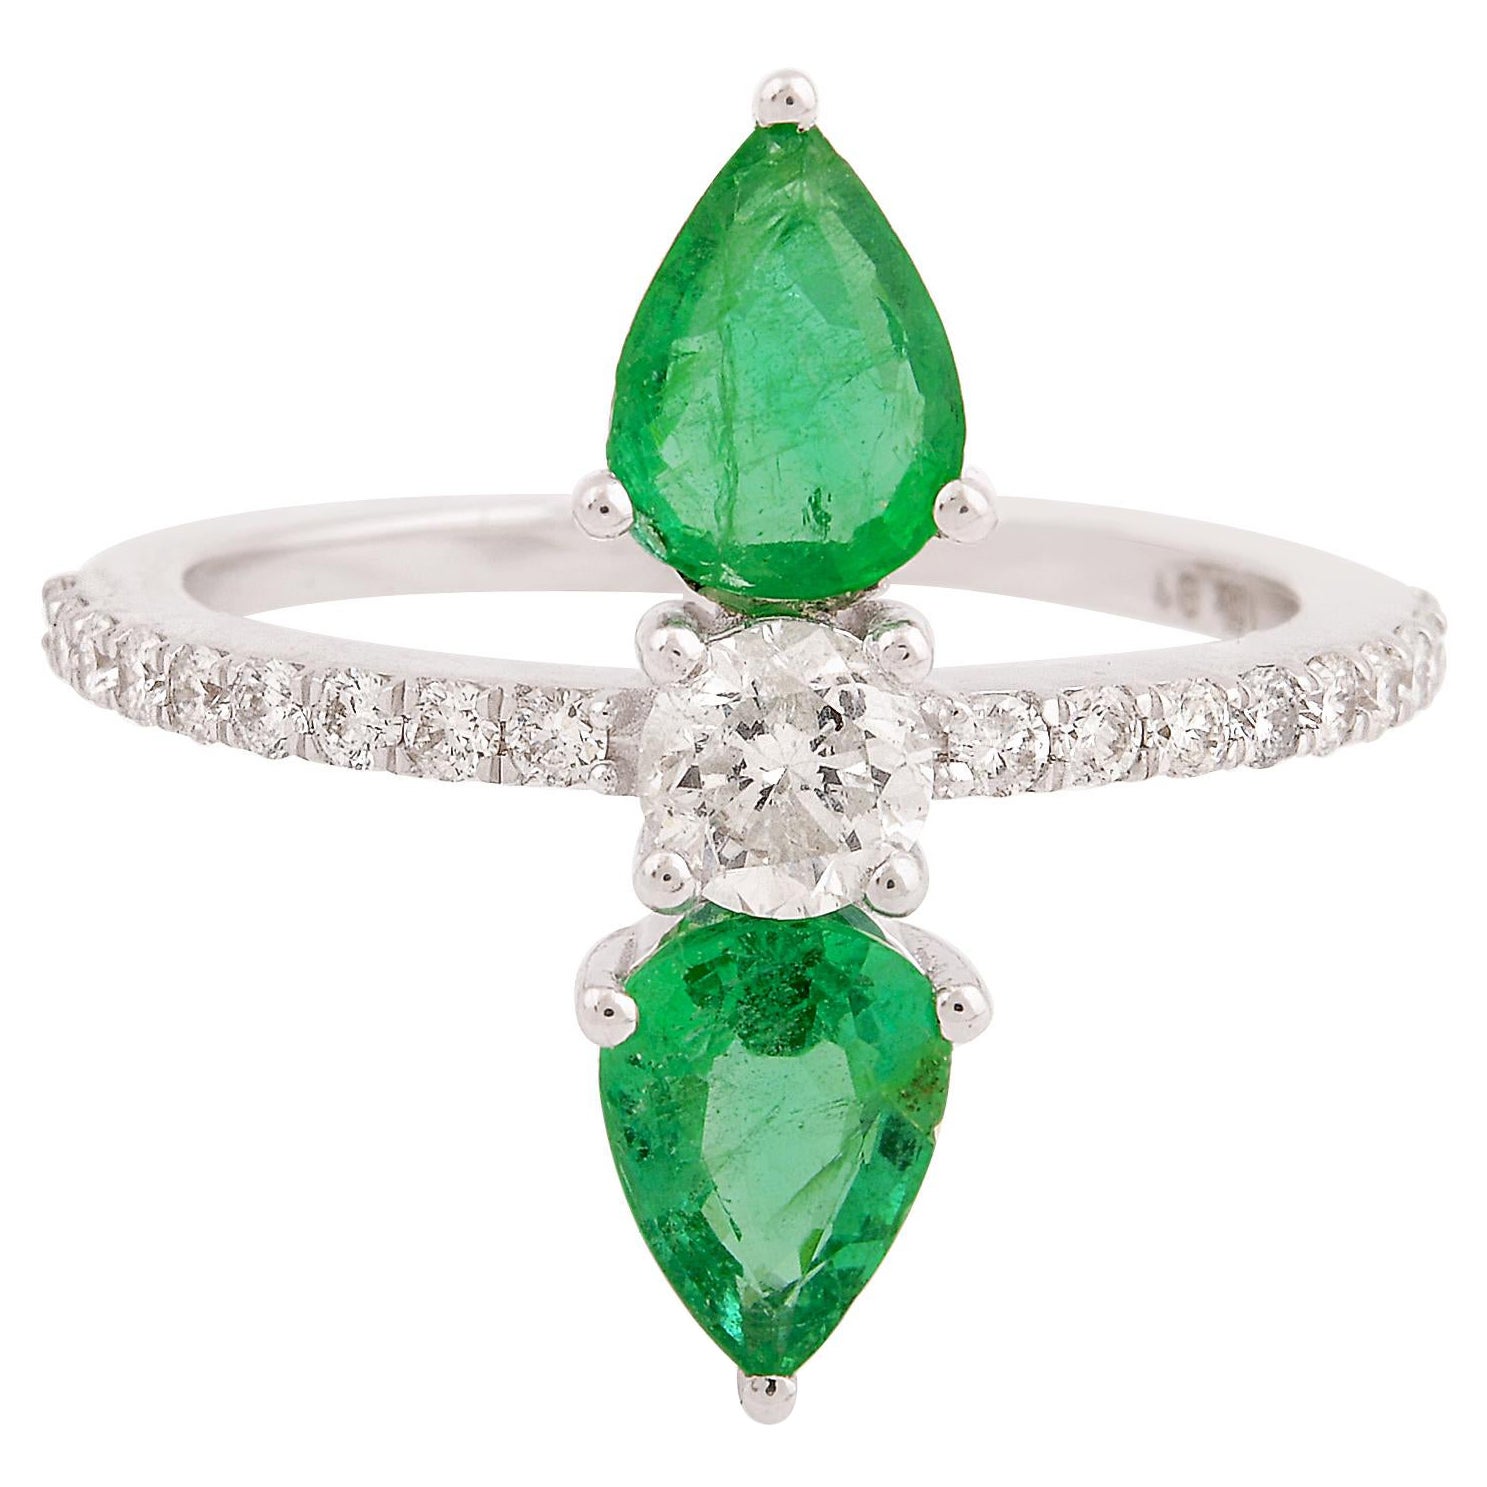 For Sale:  Pear Natural Emerald Gemstone Band Ring Diamond Solid 18k White Gold Jewelry